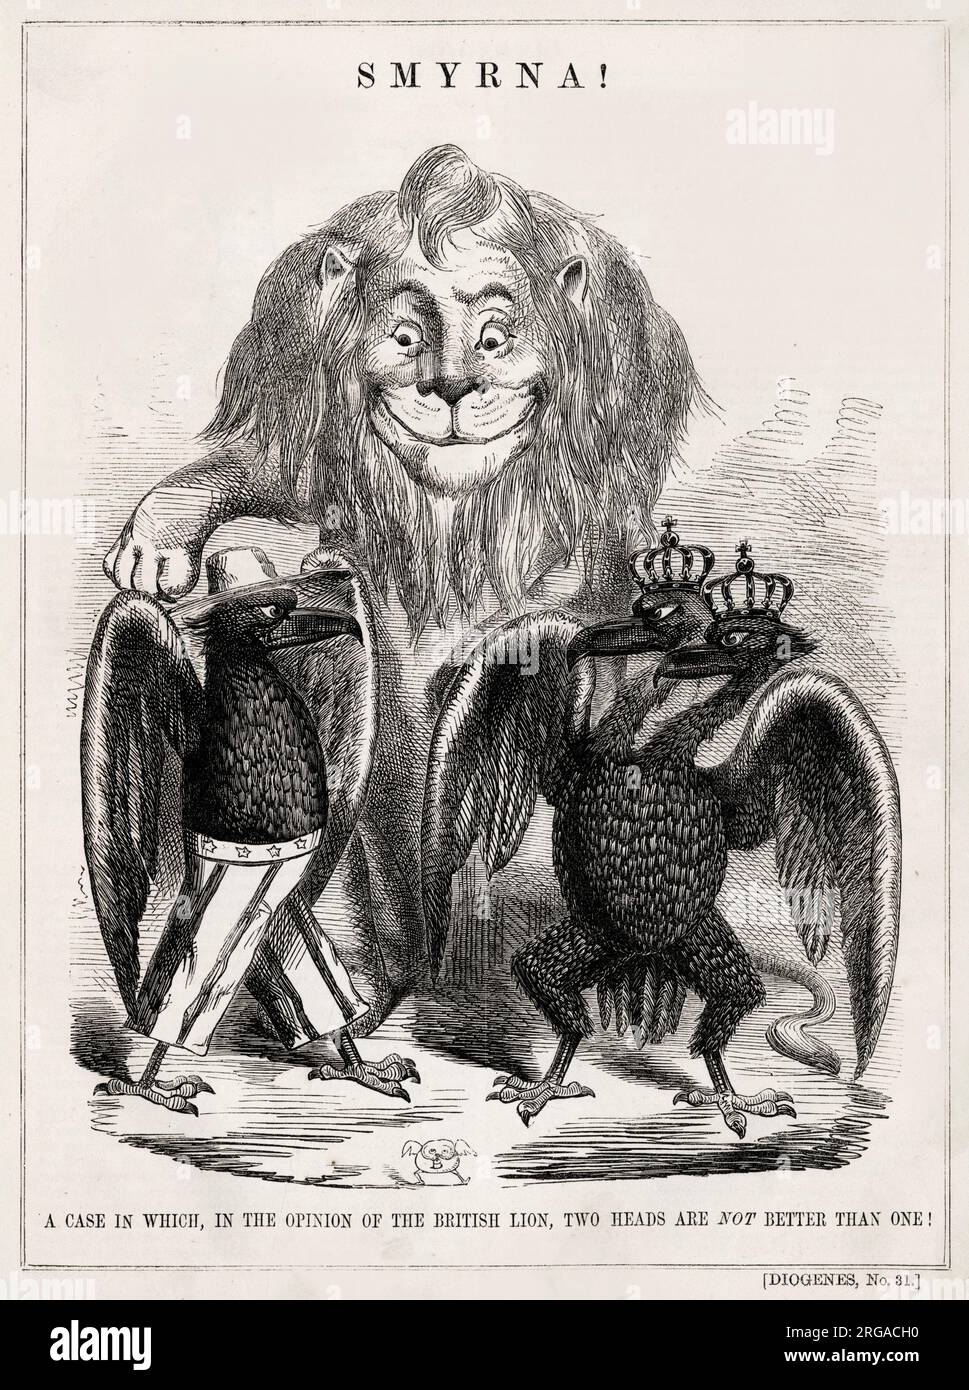 Smyrna! A case in which, in the opinion of the British lion, two heads are not better than one! Cartoon about the Koszta Affair in 1853, a diplomatic incident between the United States and the Austrian Empire. The American eagle is pitched against the double-headed eagle of the Austrian Empire. Martin Koszta, of Hungarian birth, had fled to Turkey, then emigrated to the United States. He returned to Turkey (Smyrna, now Izmir), in 1853 on business, but was arrested by Austrian officers. Stock Photo